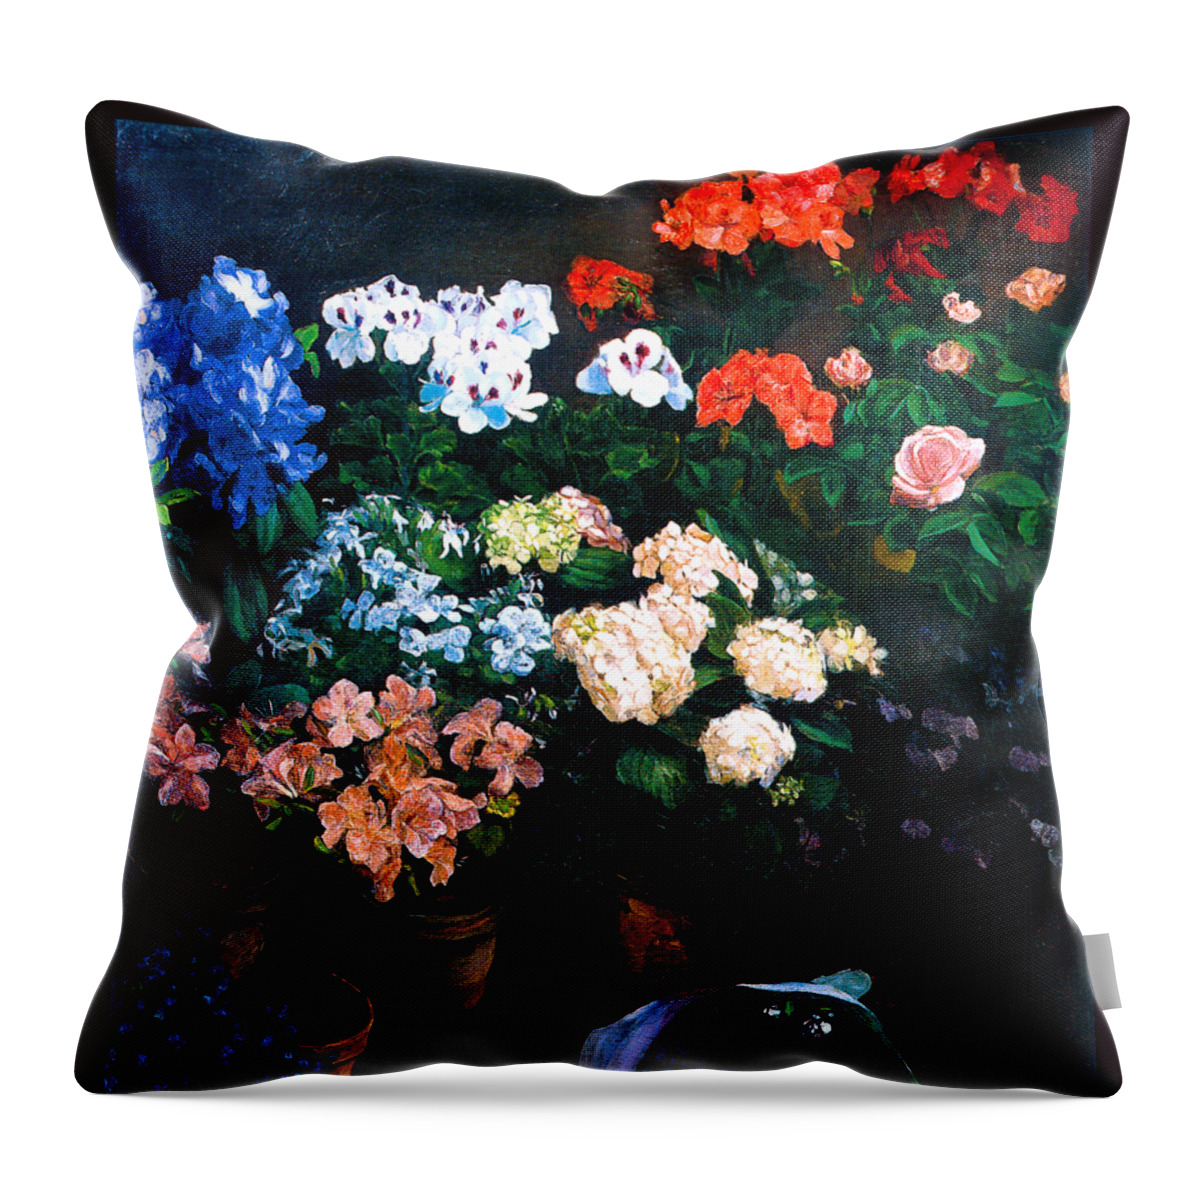 Frederic Throw Pillow featuring the painting Study of Flowers 1866 by Frederic Bazille